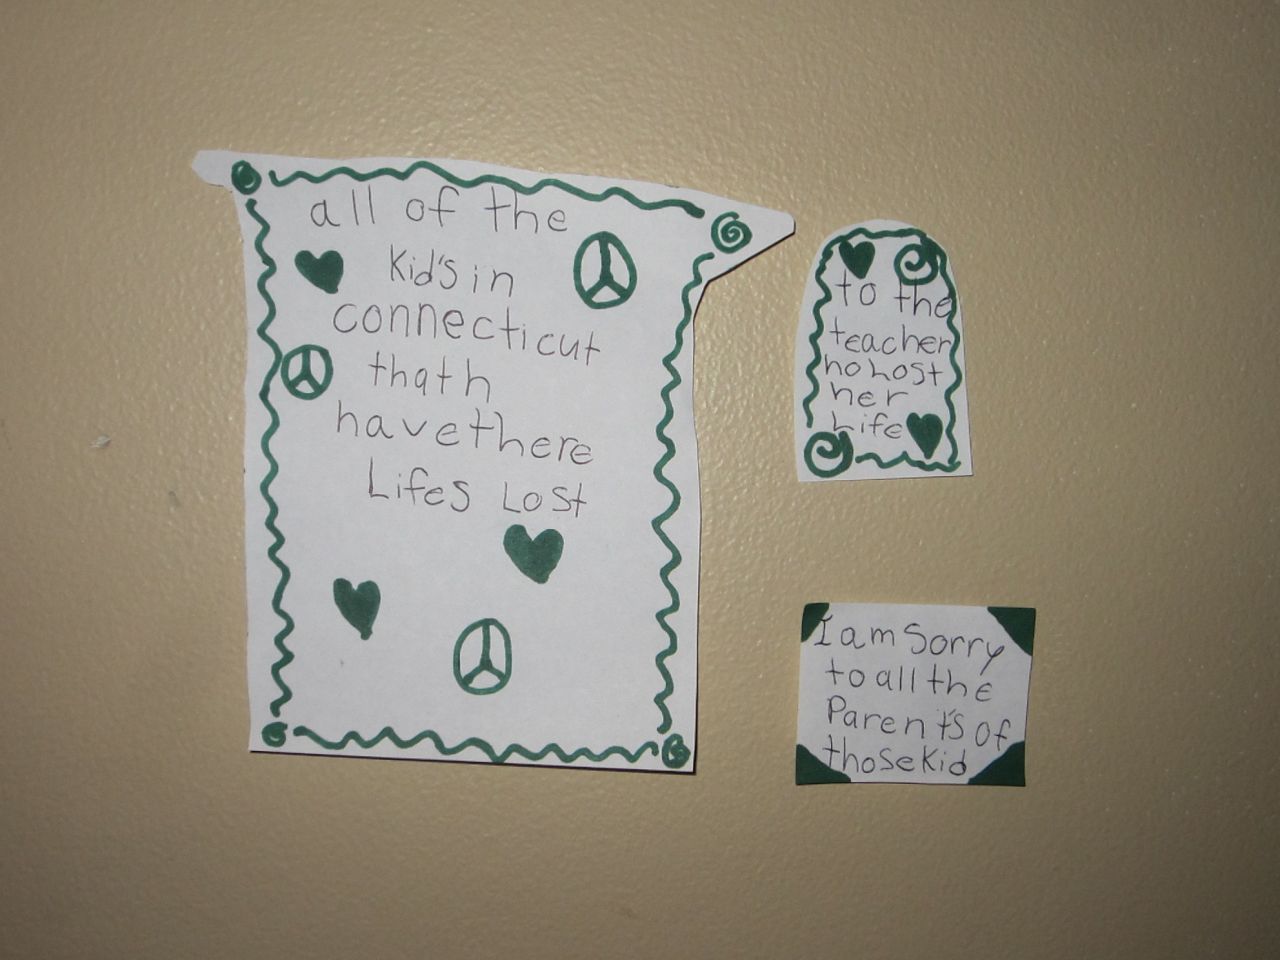 When Stephen Kales told his daughter the news, she went into her room and created these memorials. 